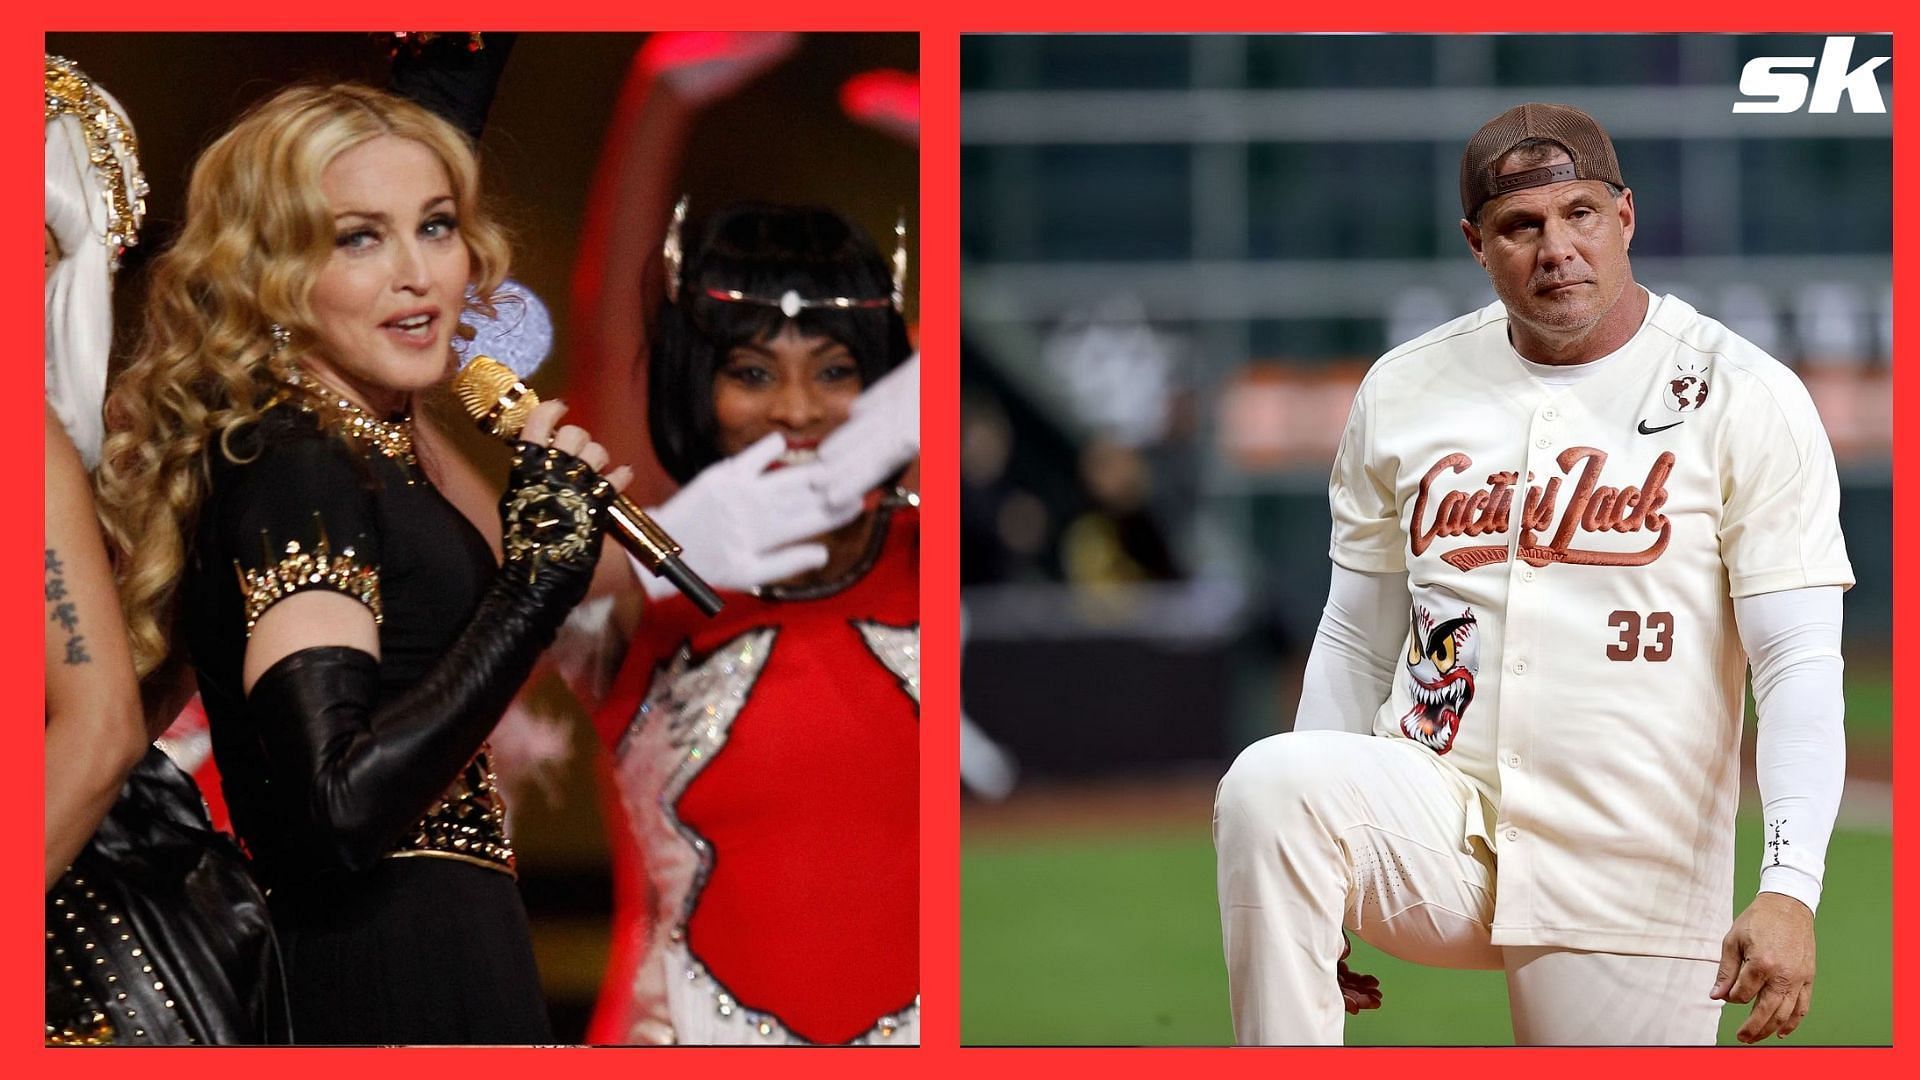 When Jose Canseco dropped bombshell about Madonna